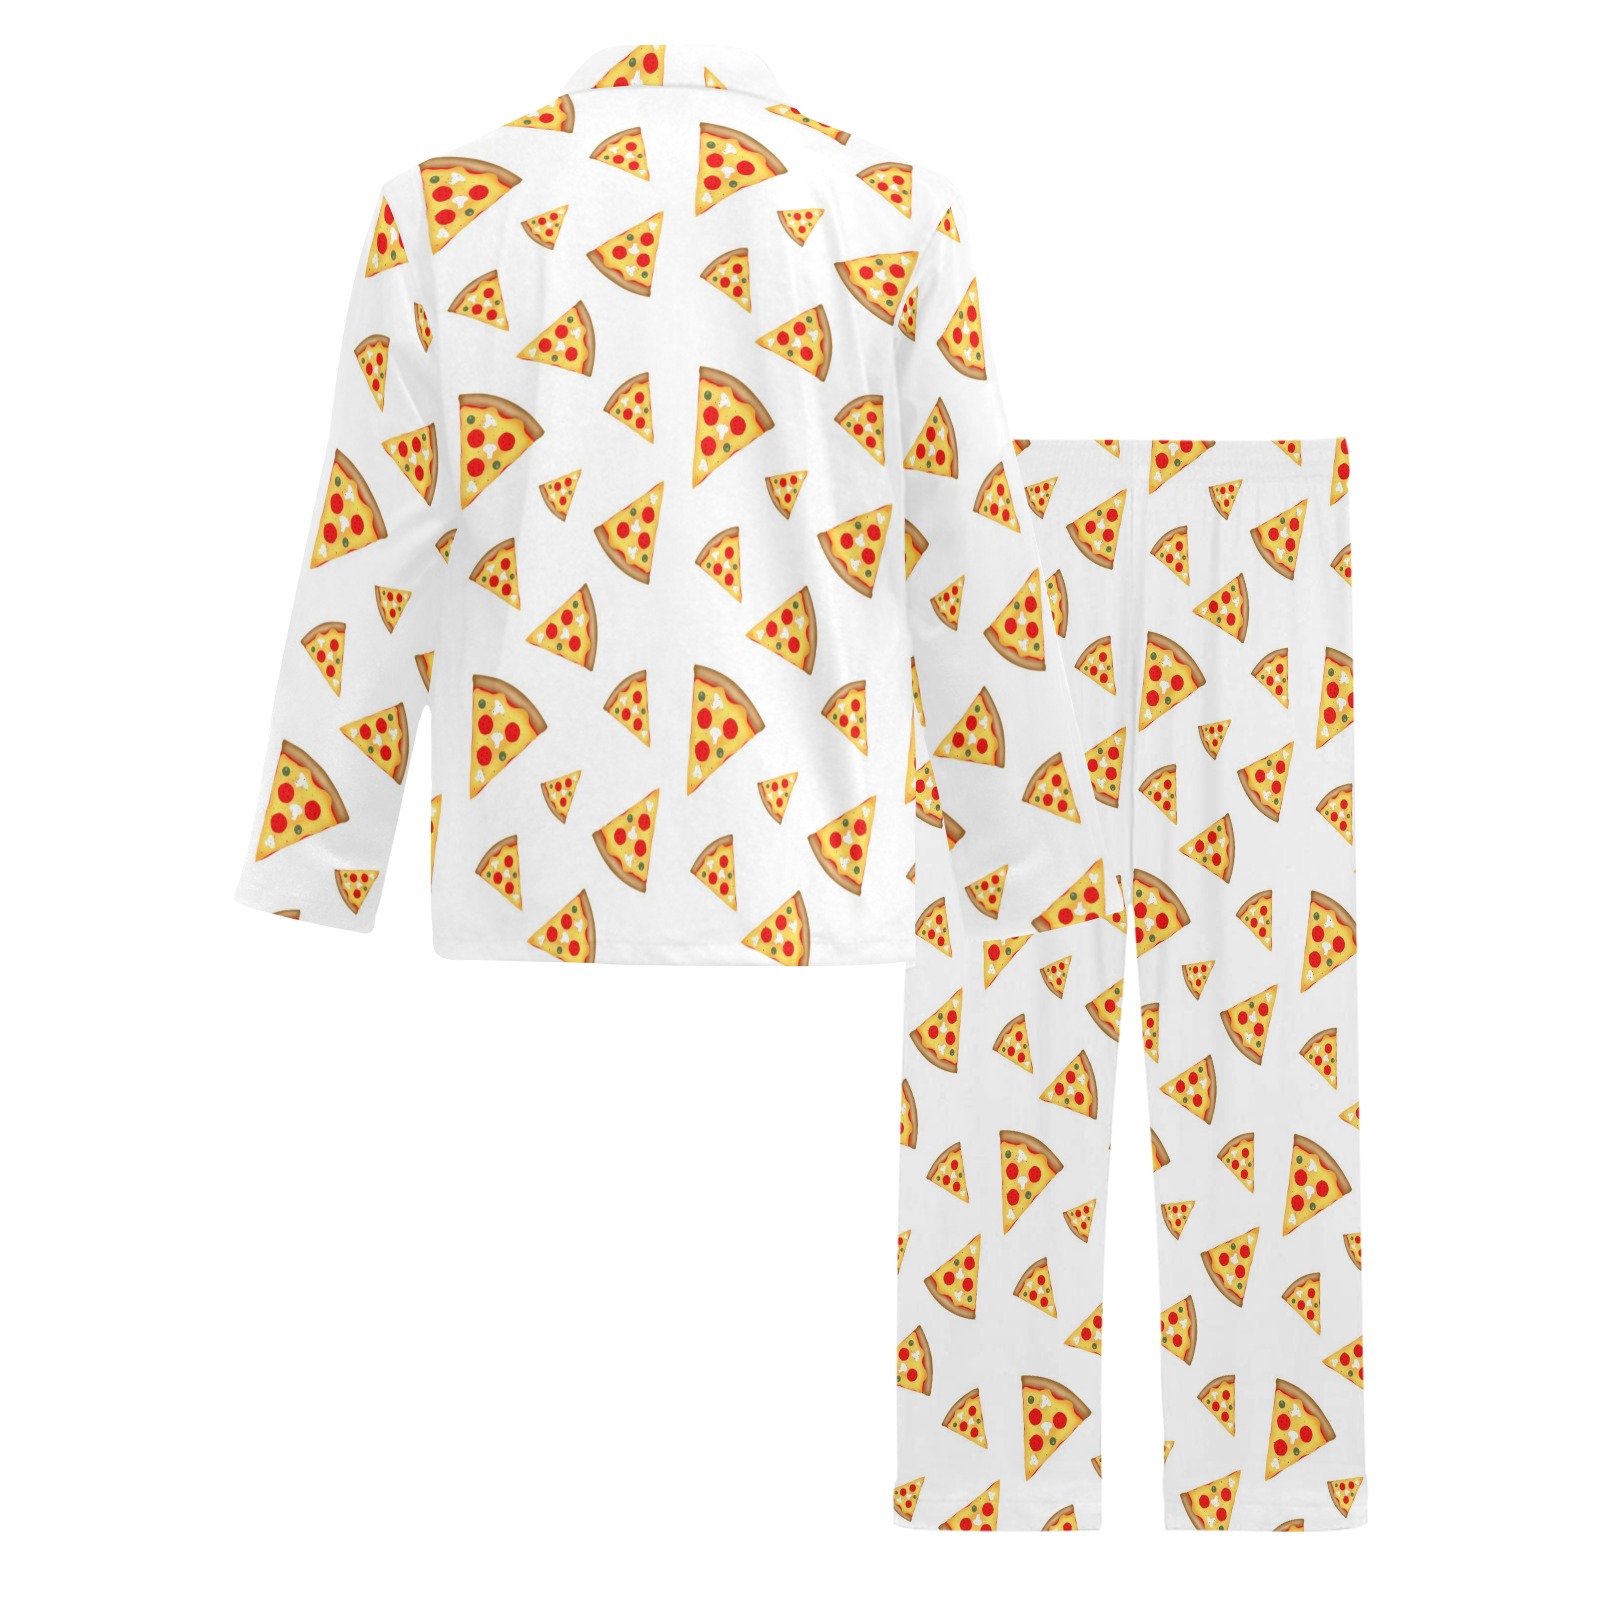 Cool and fun pizza slices pattern on white Men's V-Neck Long Pajama Set